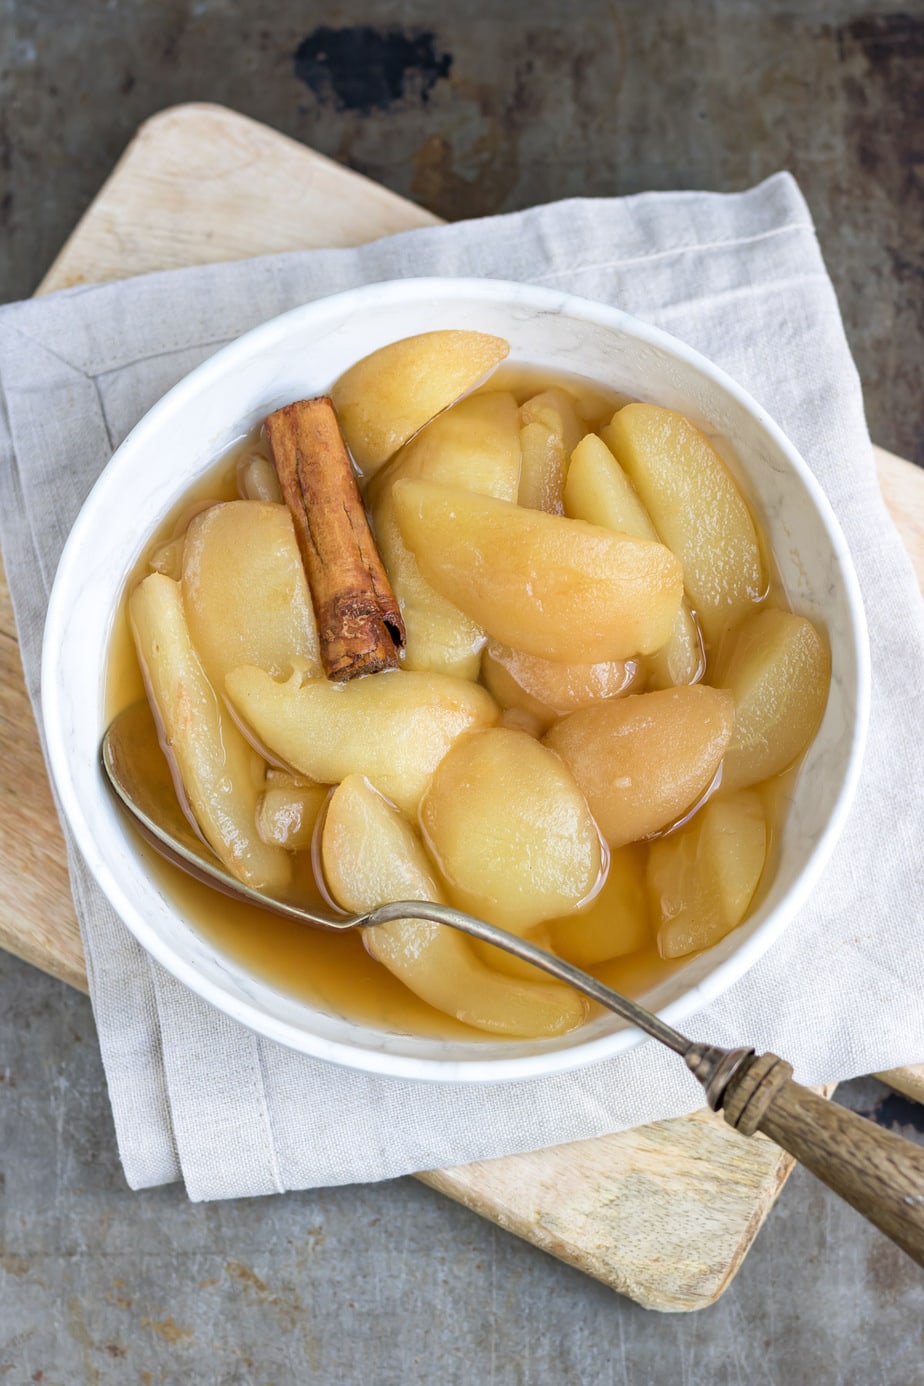 Bowl of stewed pears with a cinnamon stick.